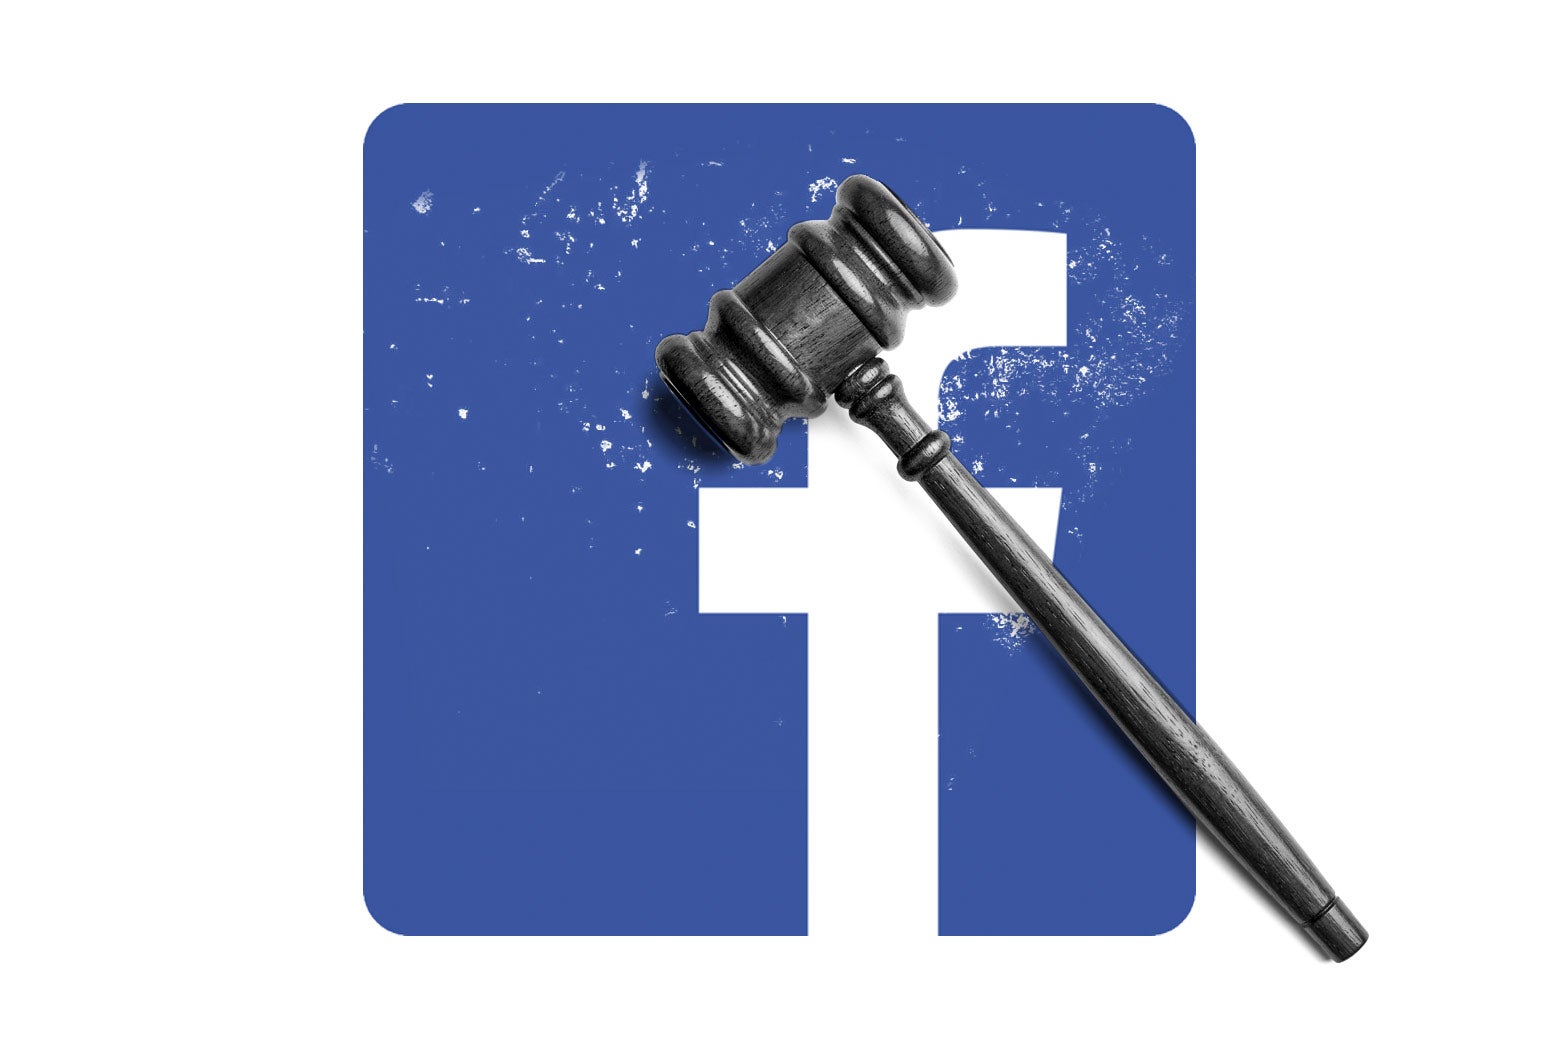 Photo illustration of the Facebook logo with a gavel superimposed.